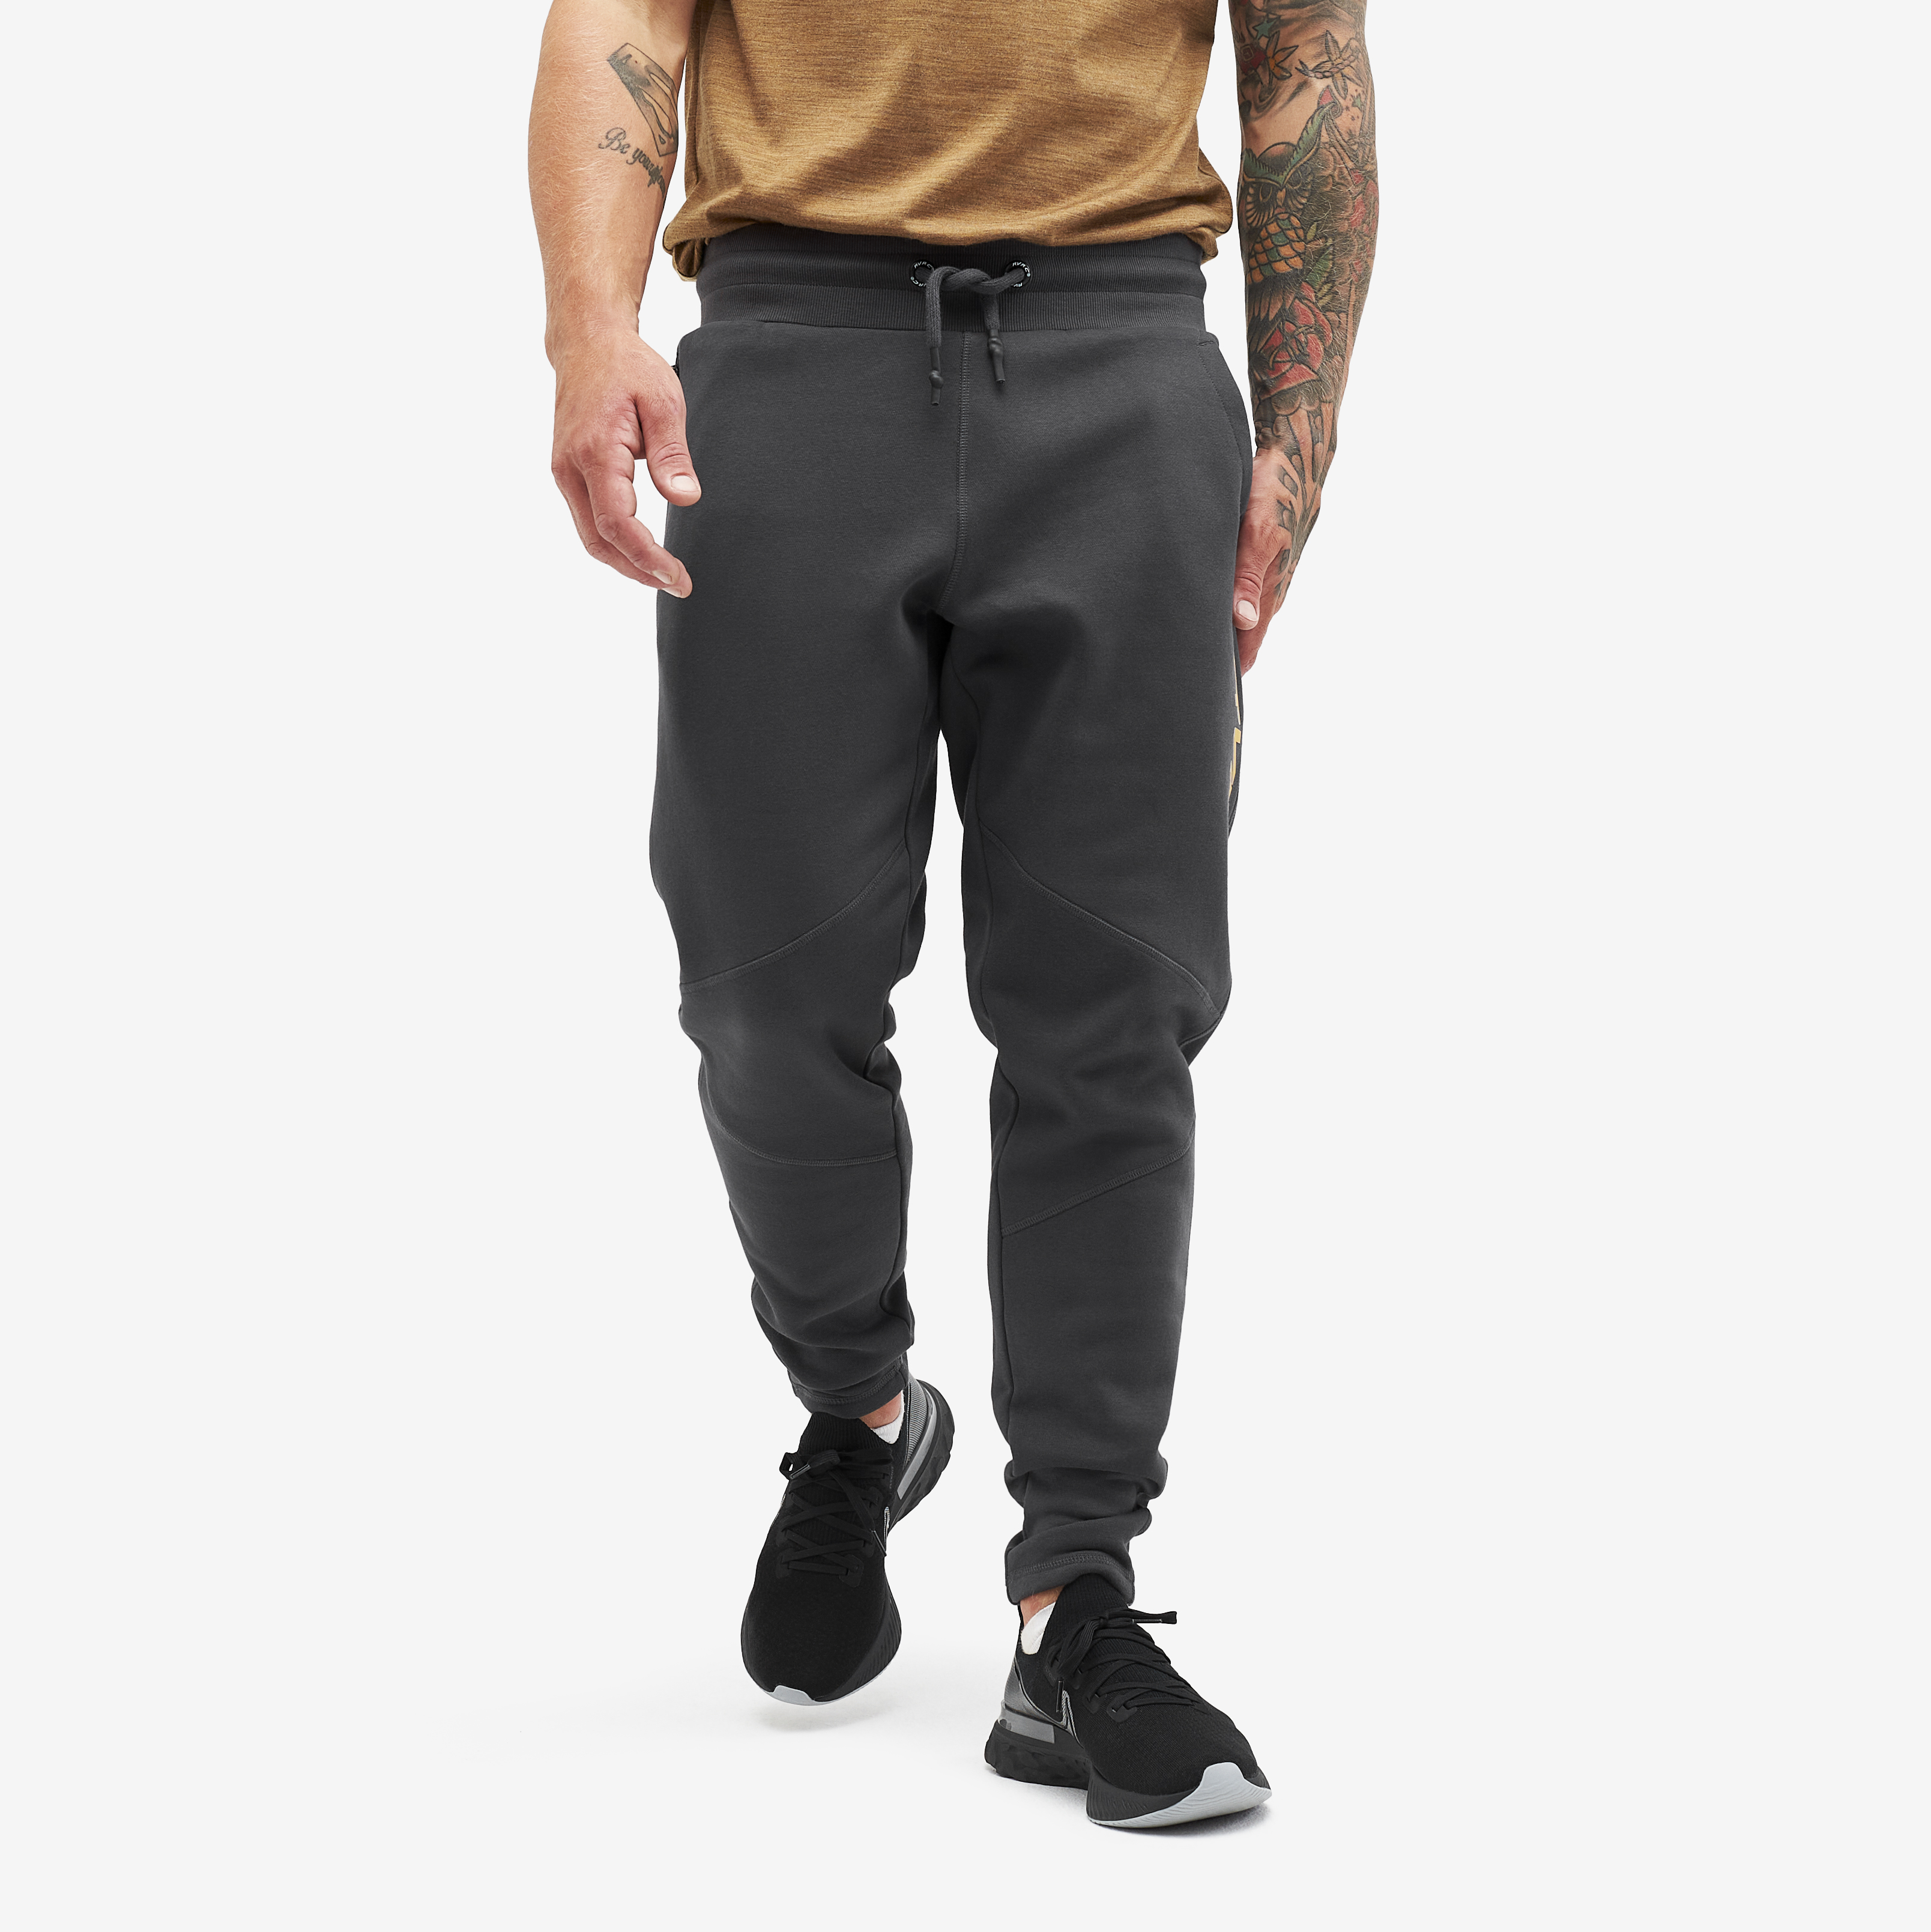 Elements Trousers Anthracite/Harvest gold Men